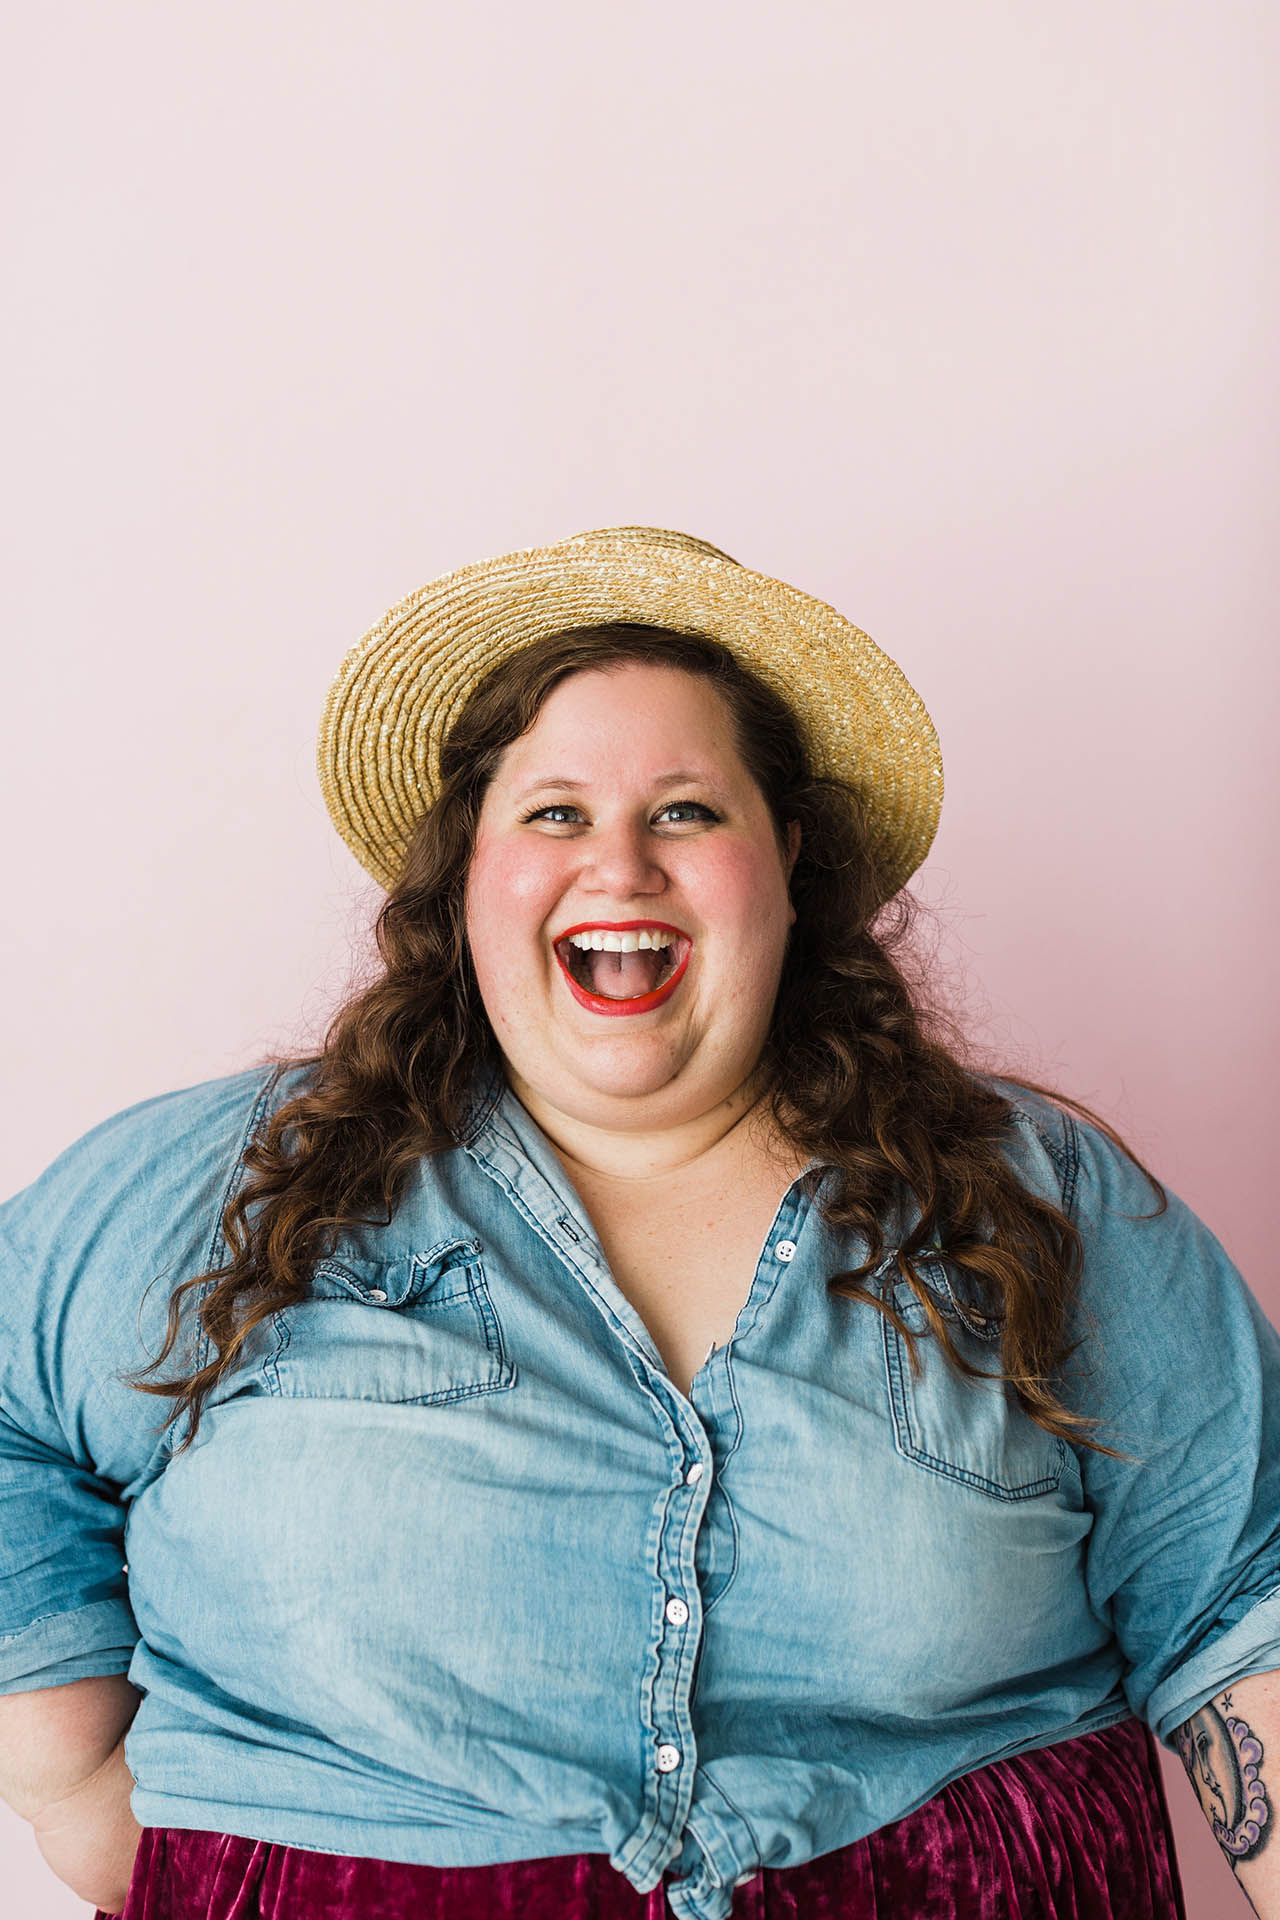 Plus size photography poses; a woman wearing a straw hat and a denim shirt smiling widely in front of a light pink background